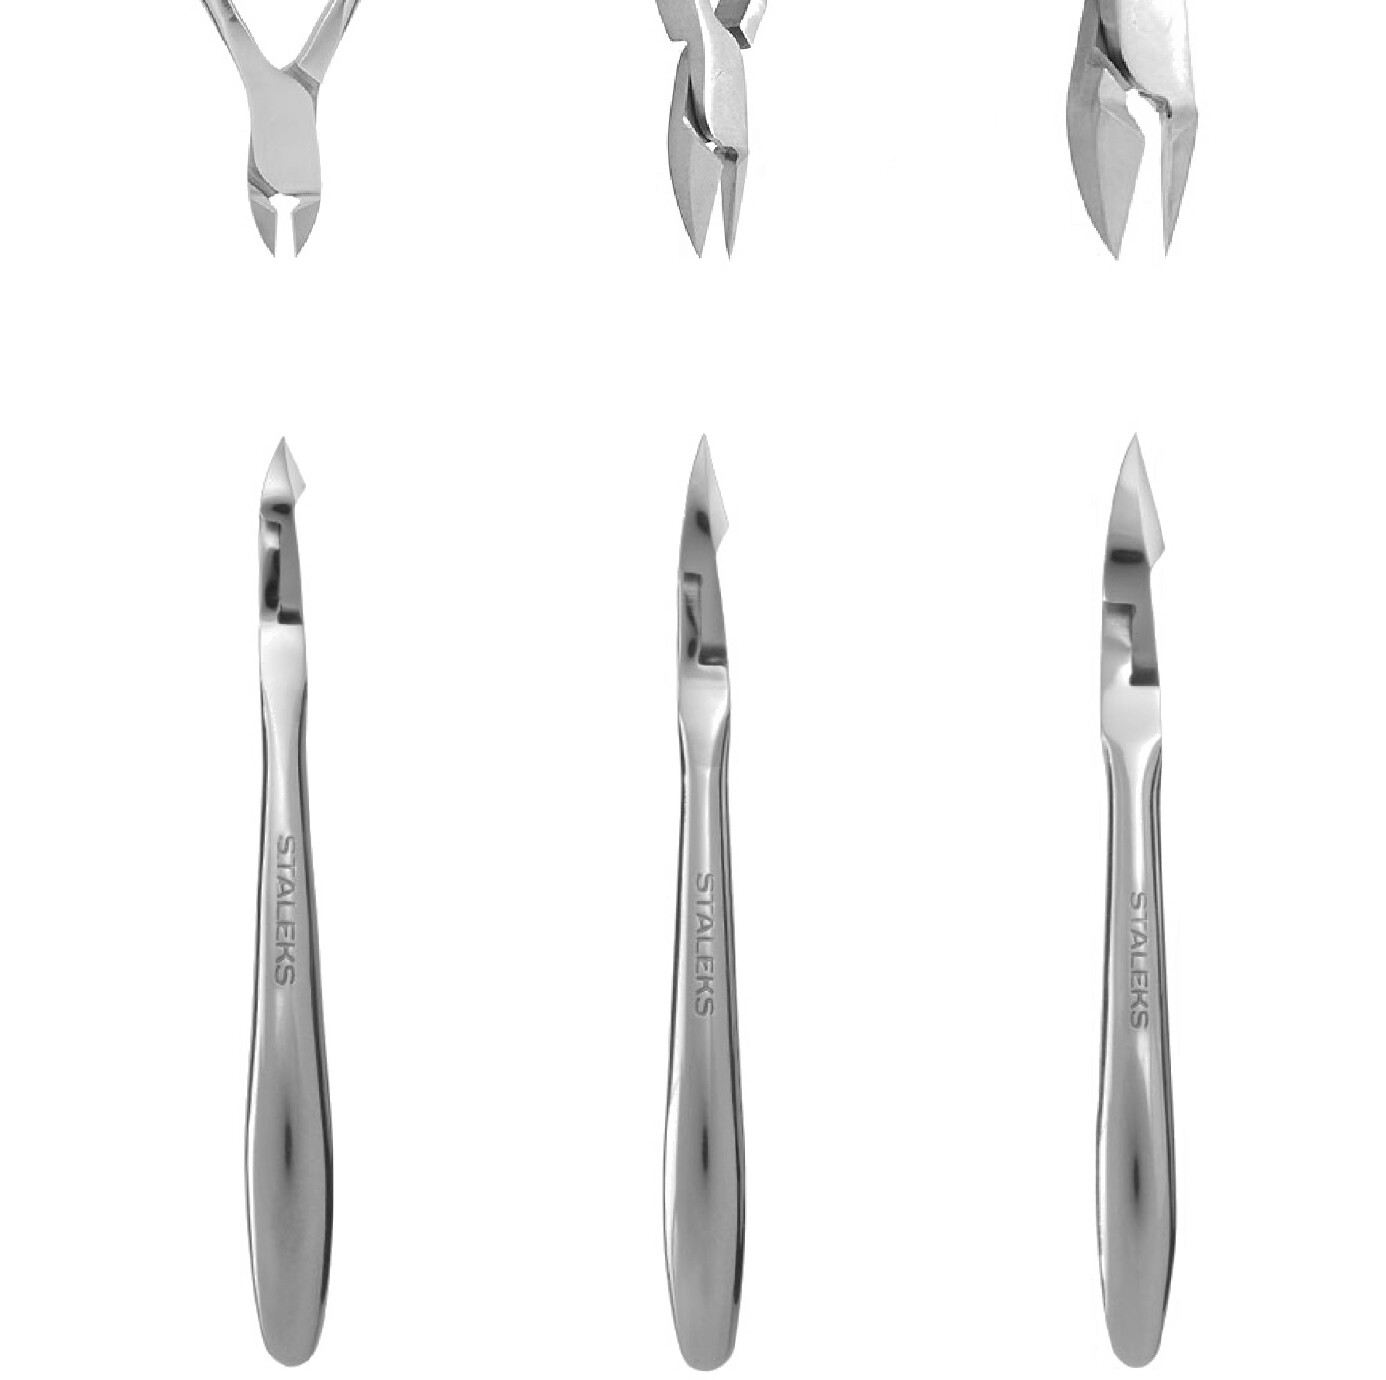 [STALEKS] Cuticle Nippers CLASSIC 10 (3 blade lengths)